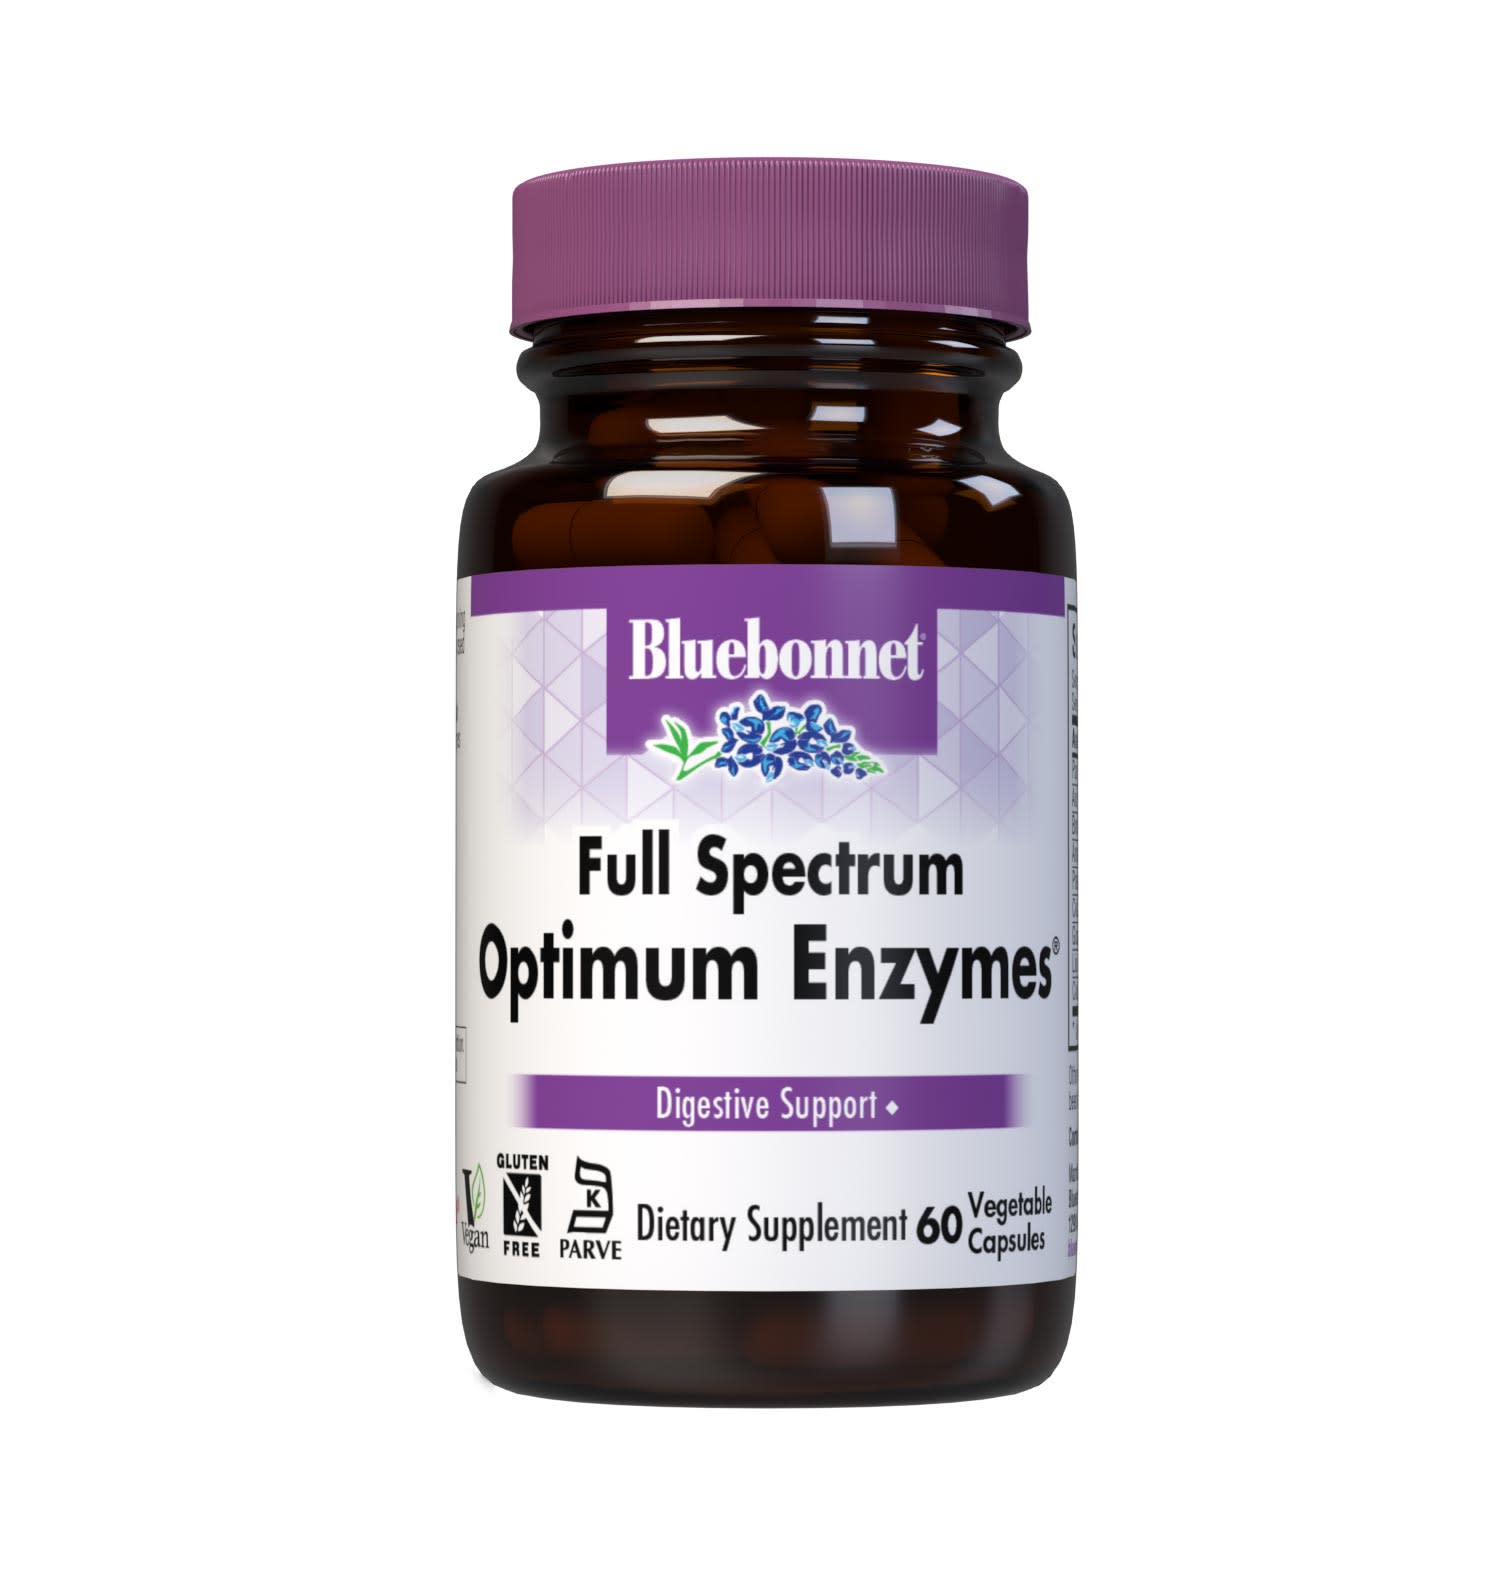 Bluebonnet’s Full Spectrum Optimum Enzymes 60 Vegetable Capsules are formulated with a combination of plant-based enzymes that help support the breakdown of protein, carbohydrates, and fats for digestive health. #size_60 count